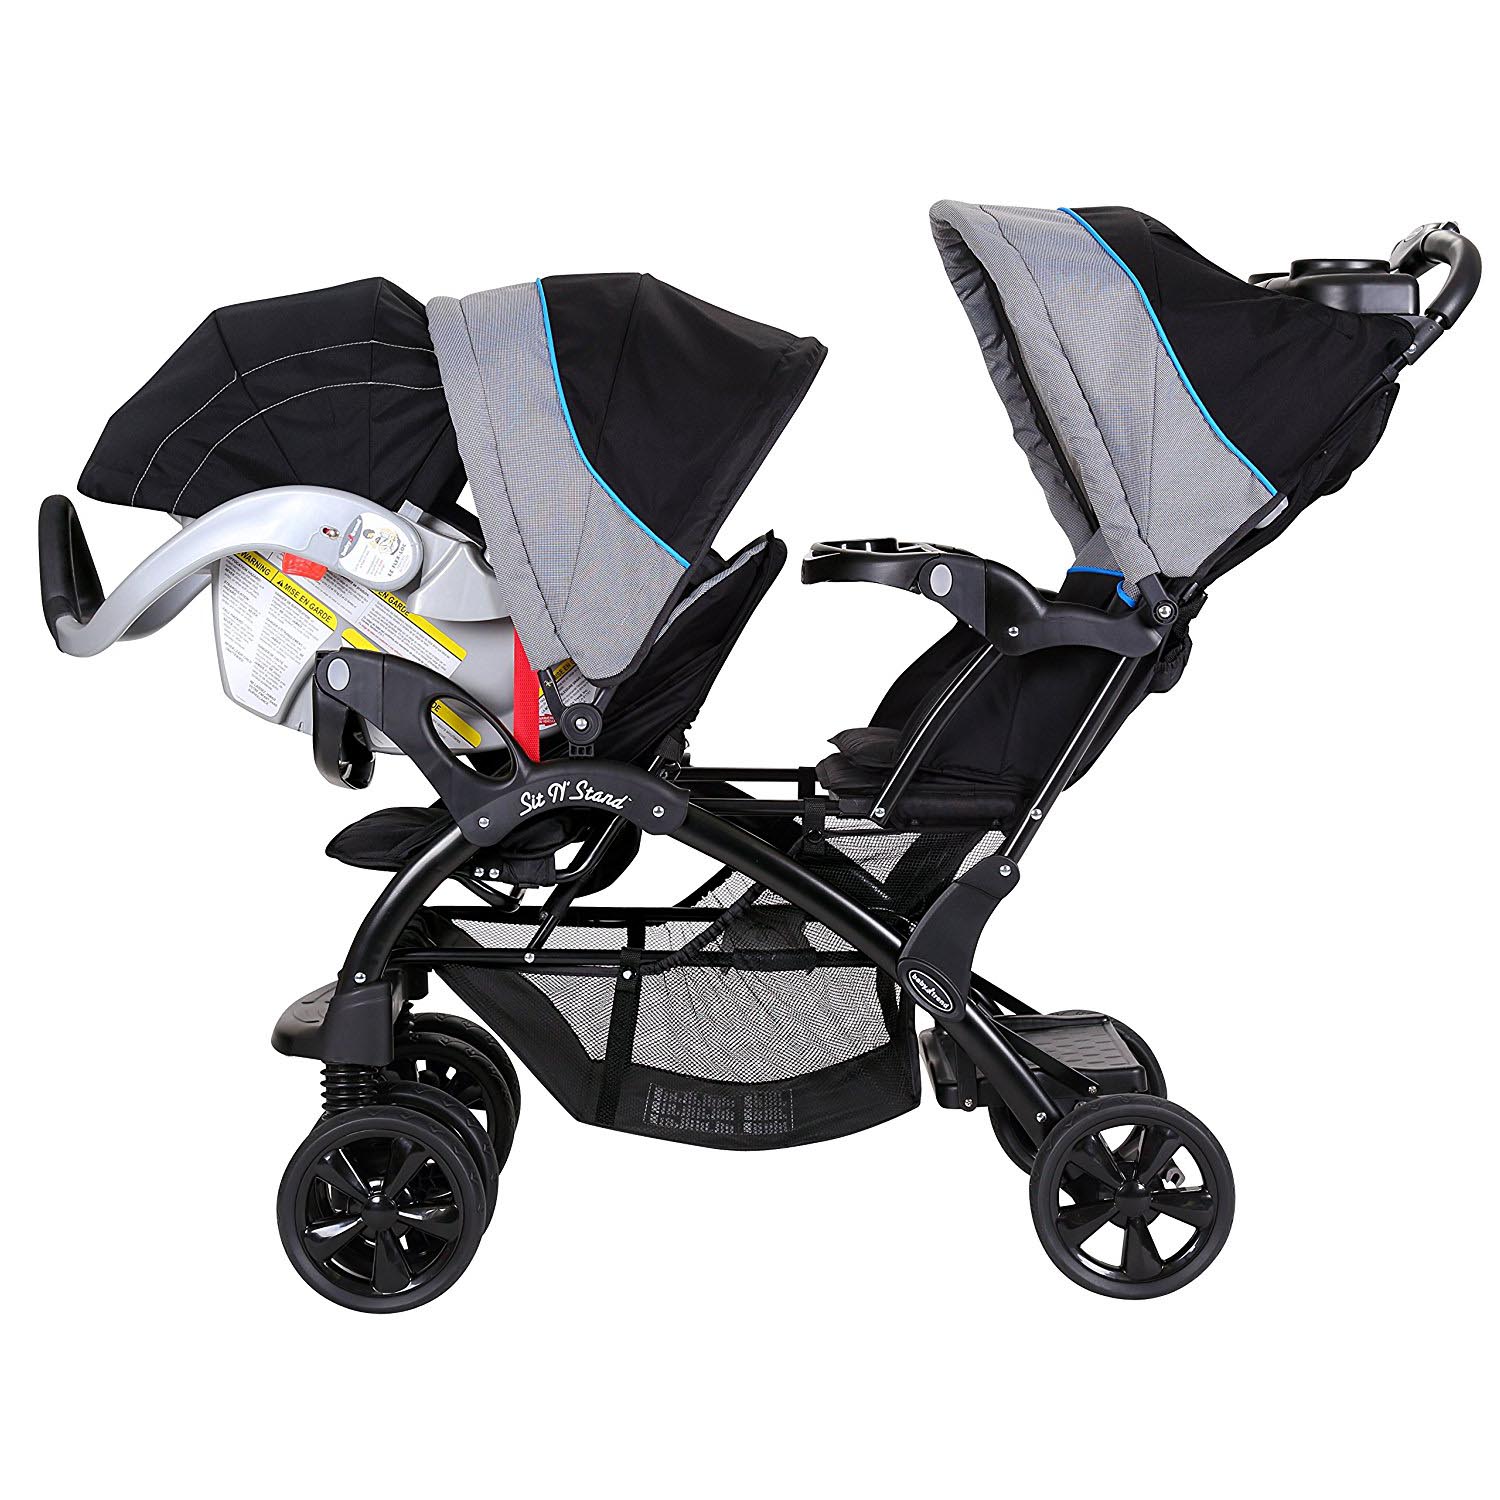 Baby Trend Sit N Stand Double Stroller, Millennium Blue - image 4 of 6